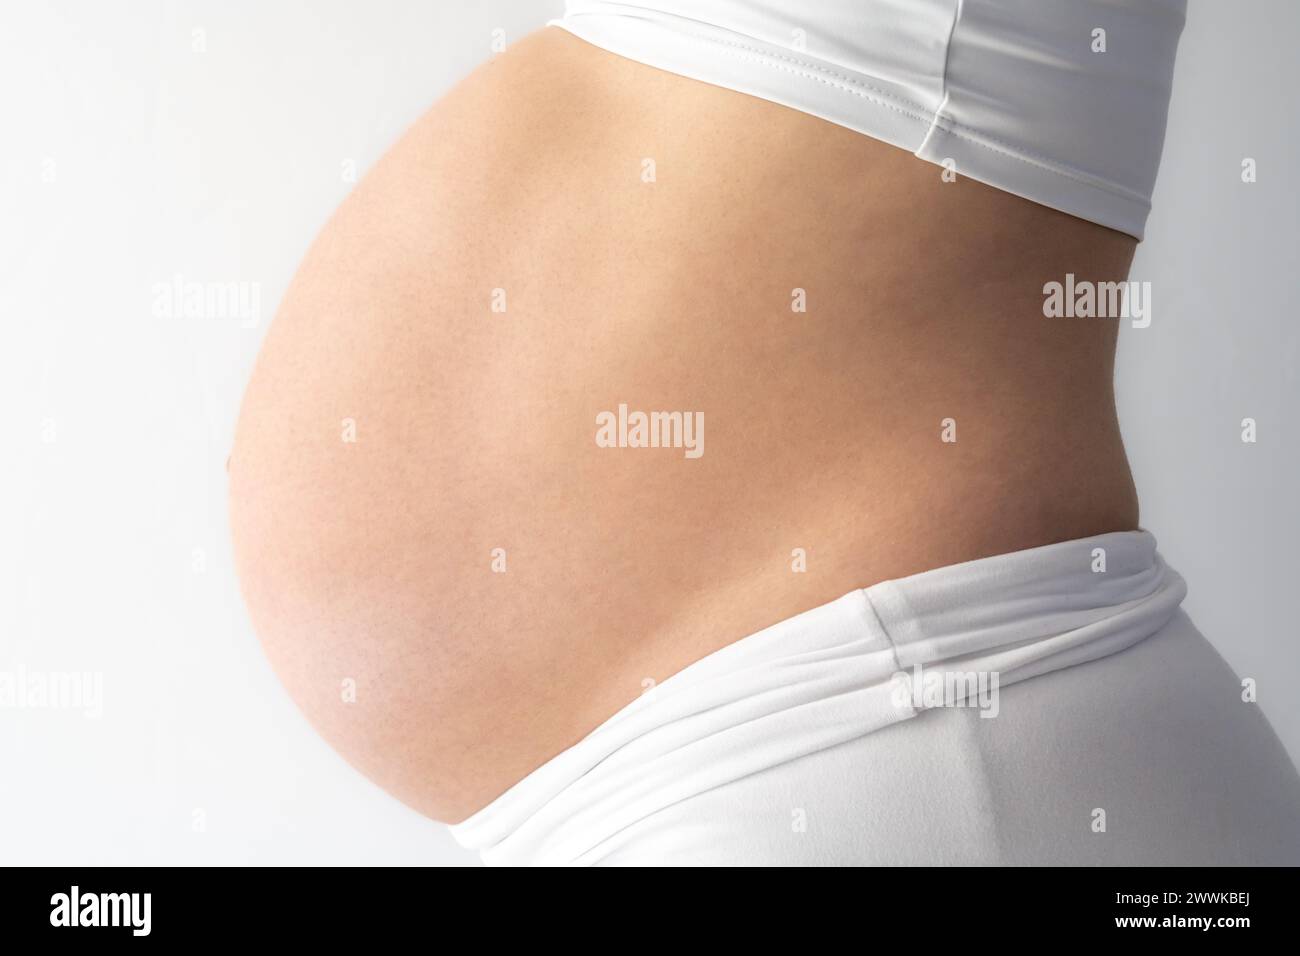 Description: Middle part of unrecognizable standing mother with very round pregnant baby bump. Side view. White background. Bright shot. Stock Photo